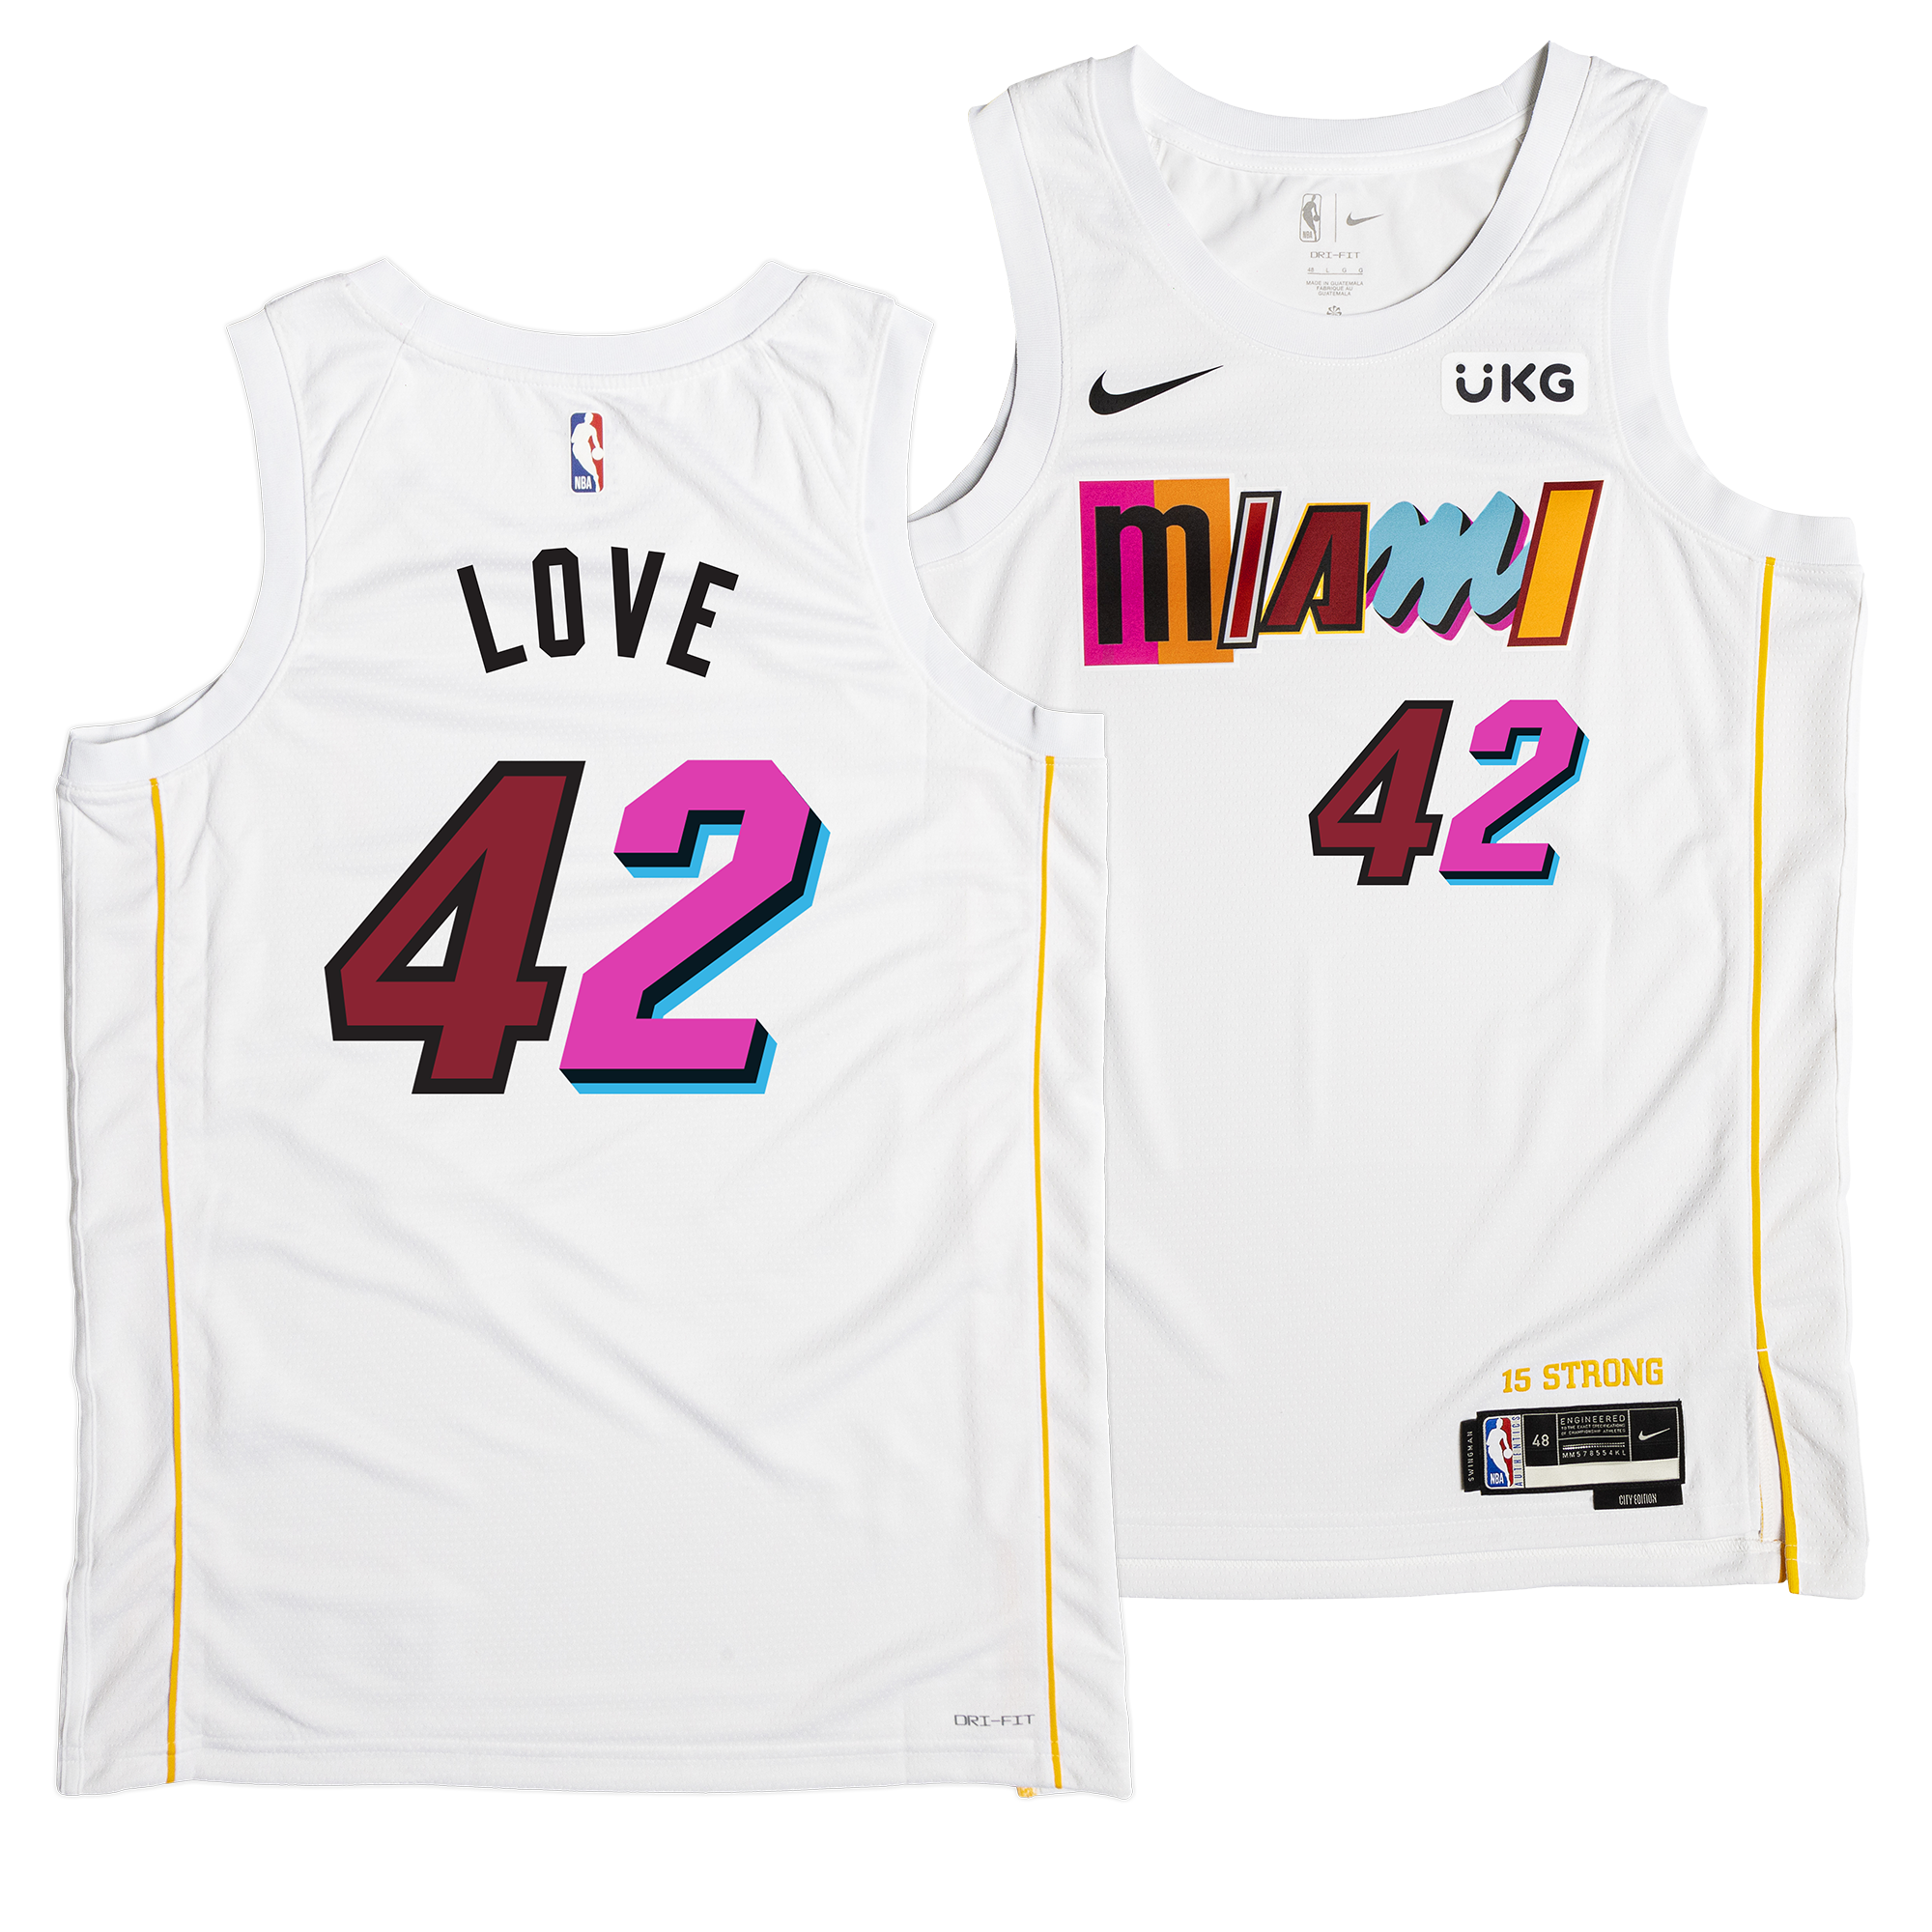 miami vice jersey youth